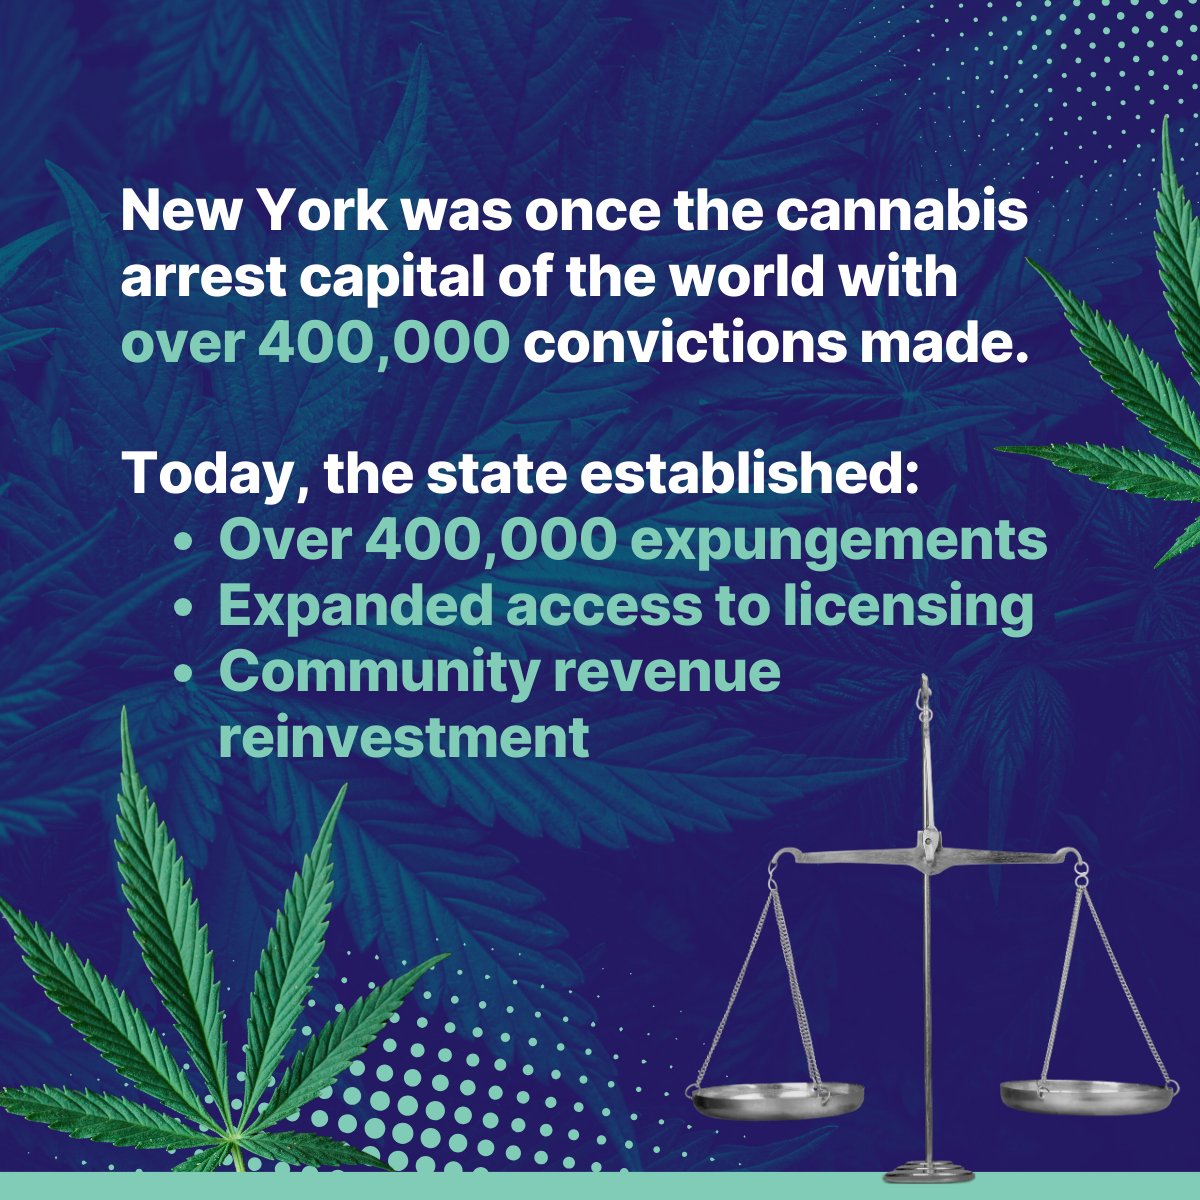 As we near three years of legalized #NYcannabis, we celebrate New York's transformation from the 'cannabis arrest capital' to a leading example of reparative justice. We're building a future where every New Yorker has the opportunity to thrive in a fair and flourishing market.